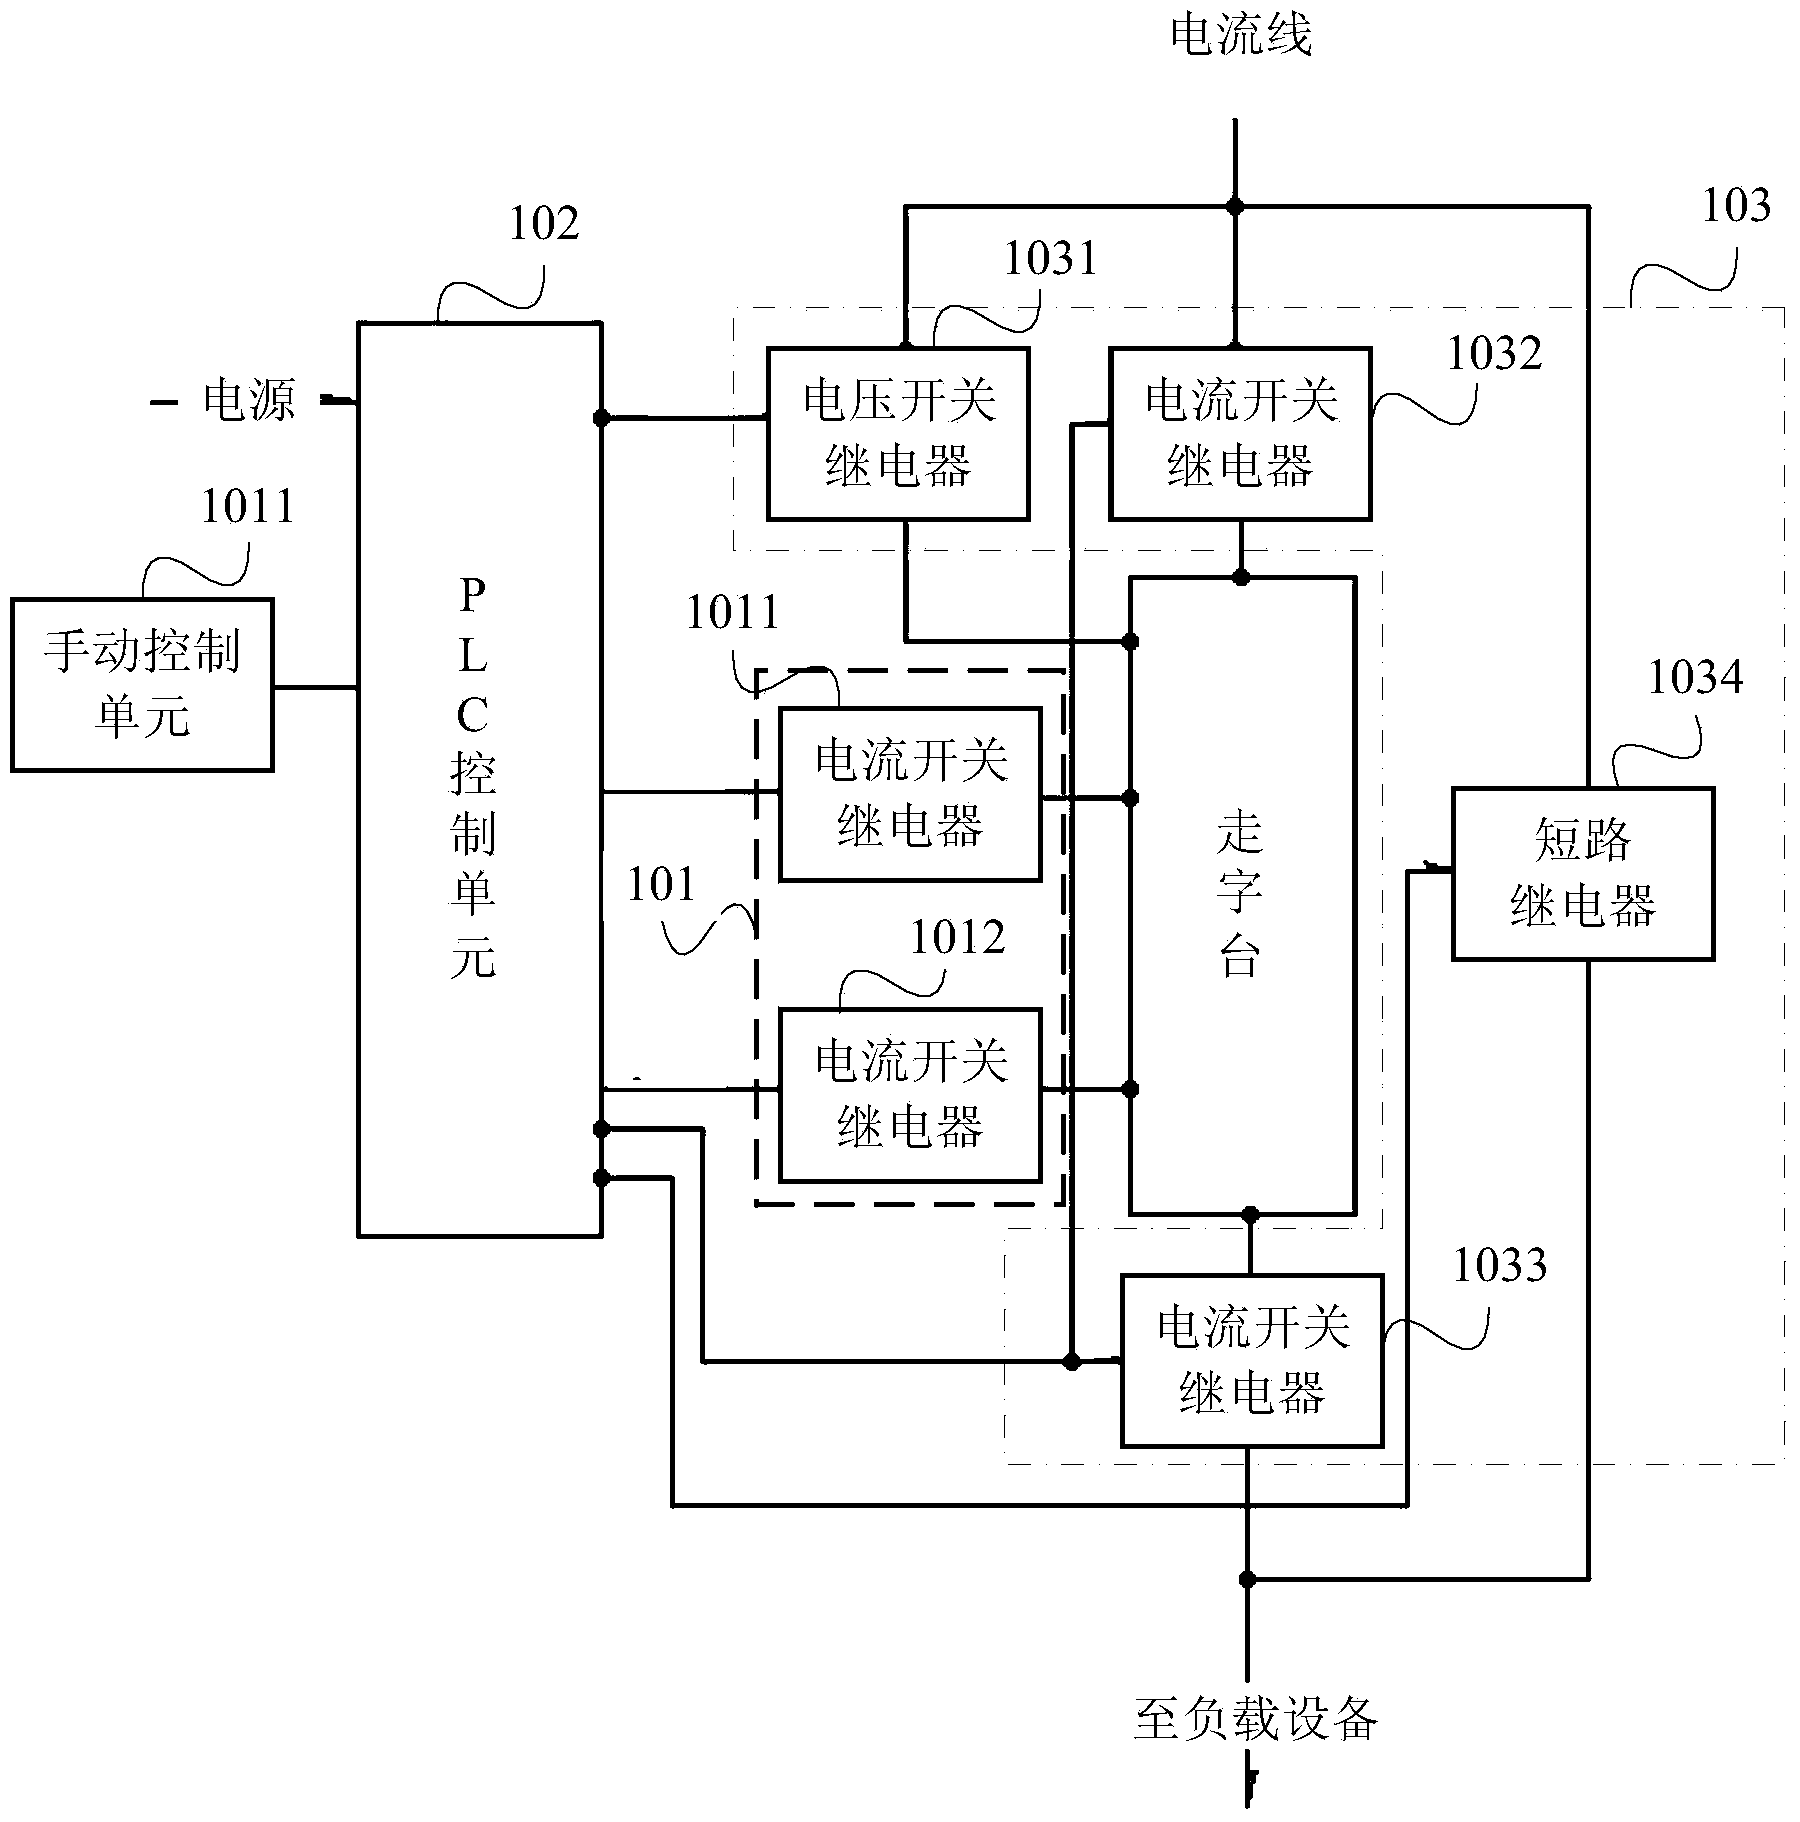 An electric meter abnormity switching apparatus